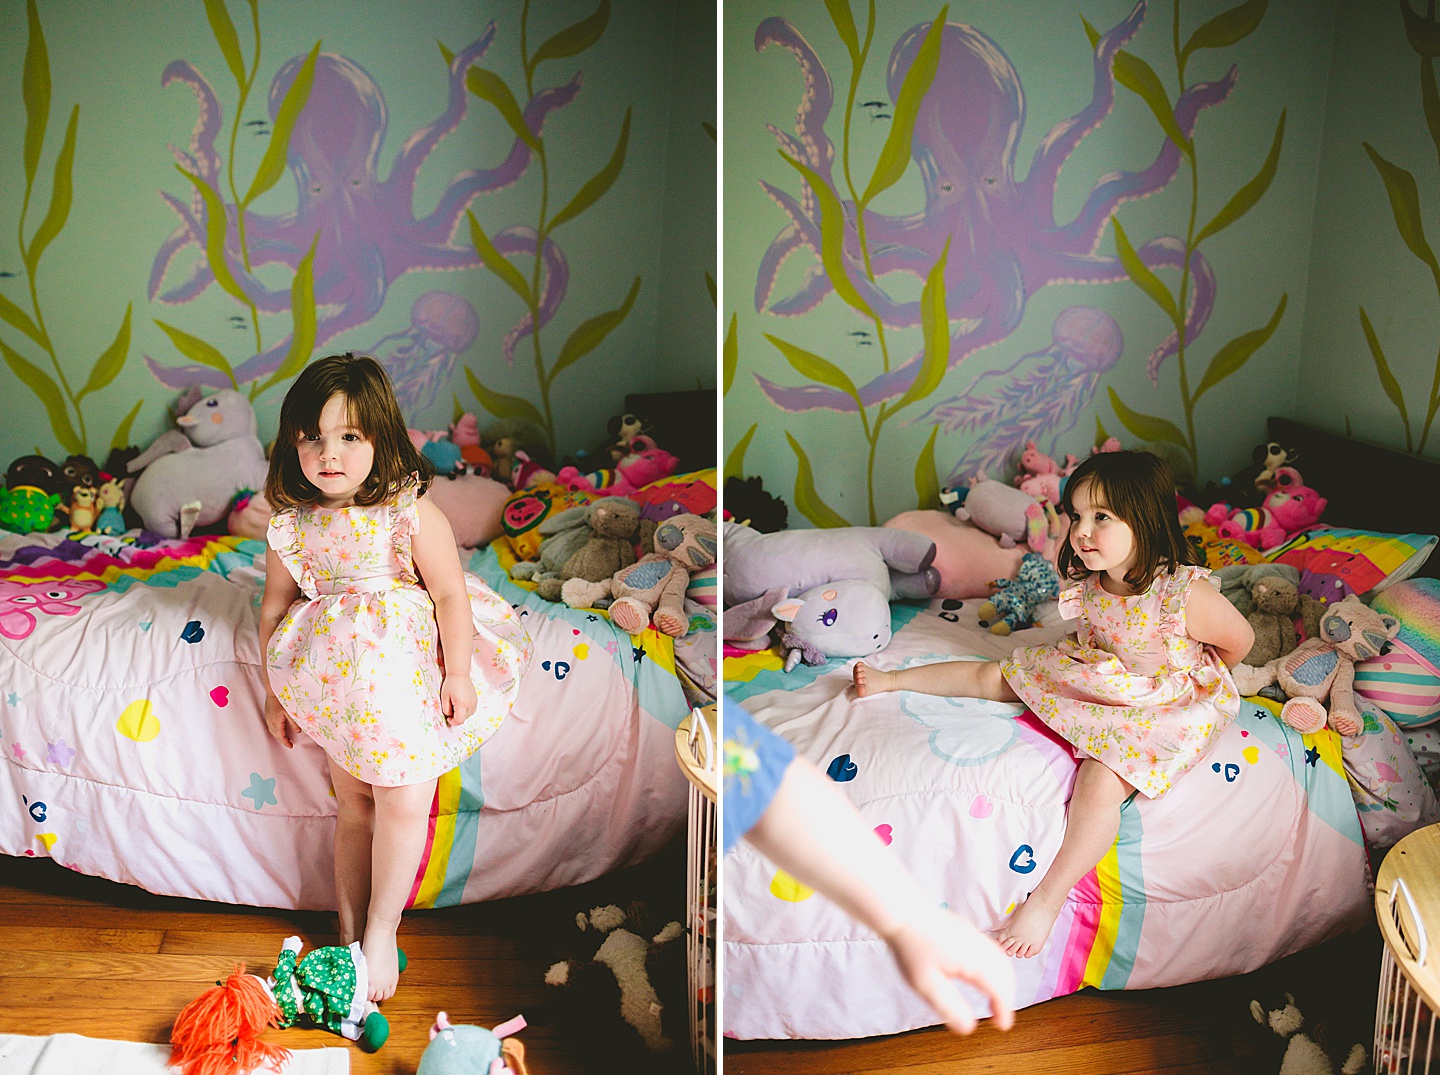 Girl surrounded by stuffed animals